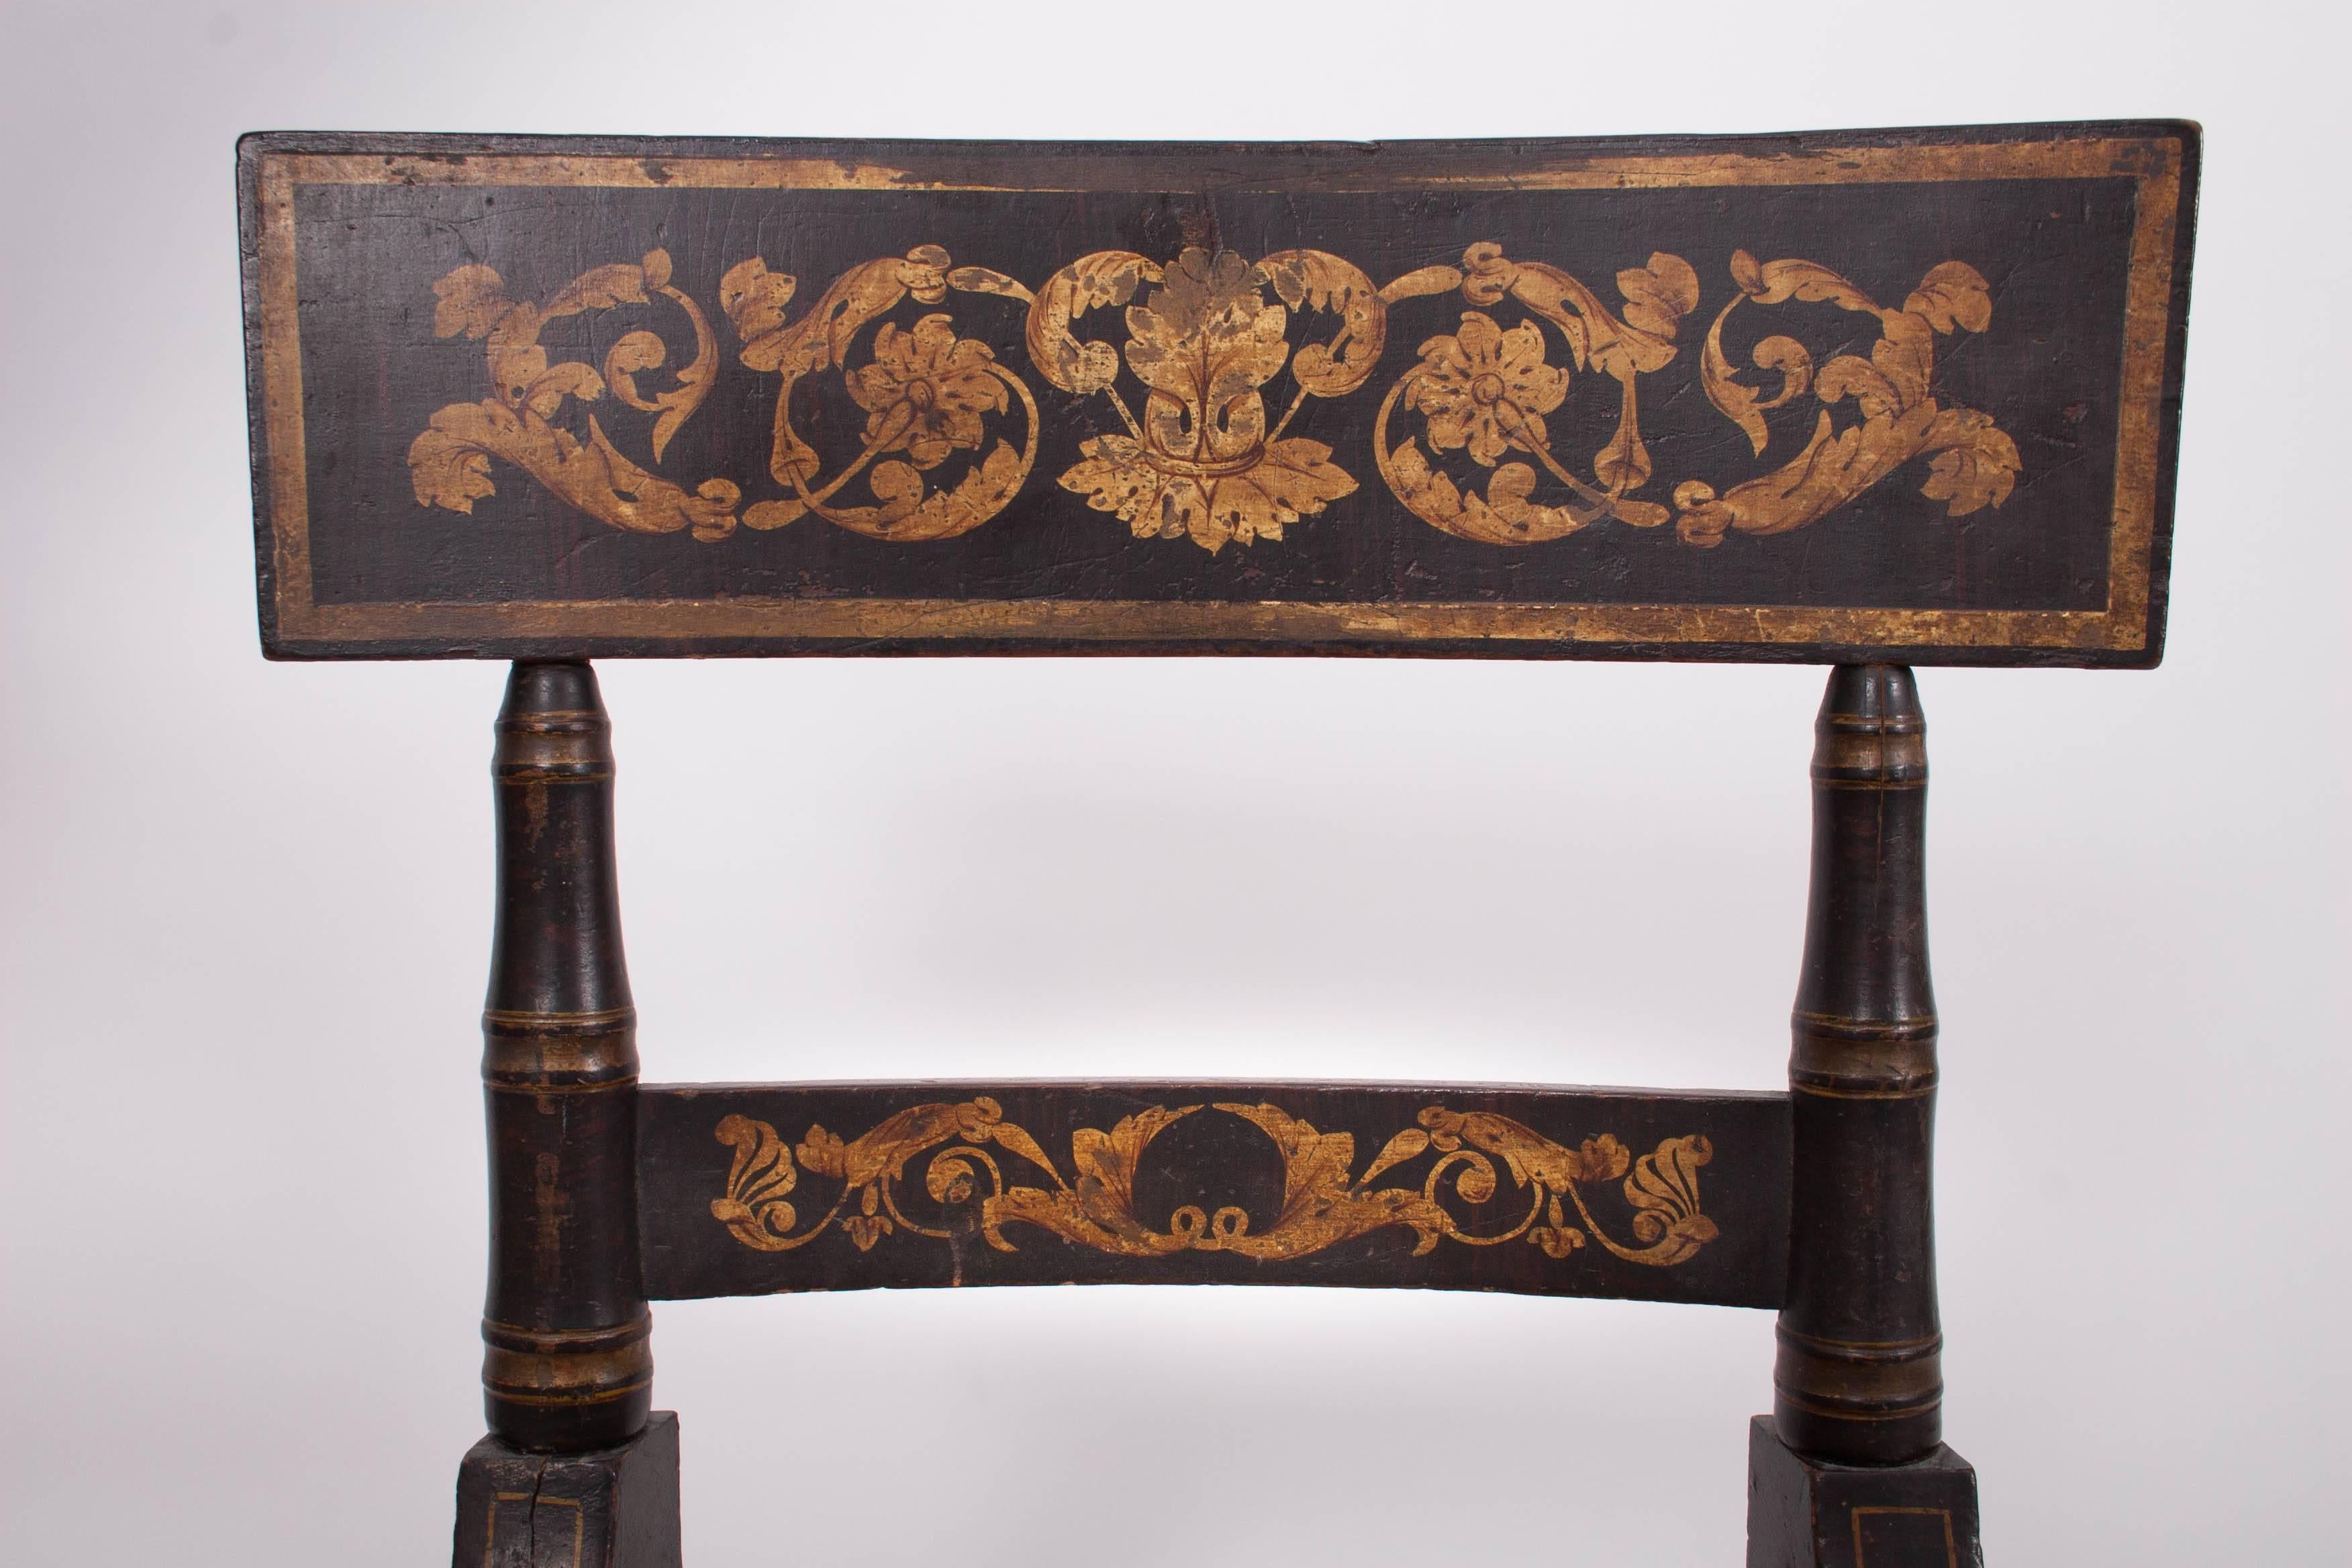 Baltimore, circa 1825-1830 each with tablet crest faux-grained a gilt-stenciled with foliate scrolls, the turned styles holding a stenciled stay-rail and continuing to a rush seat above turned, tapering front legs punctuated with gold-painted bands